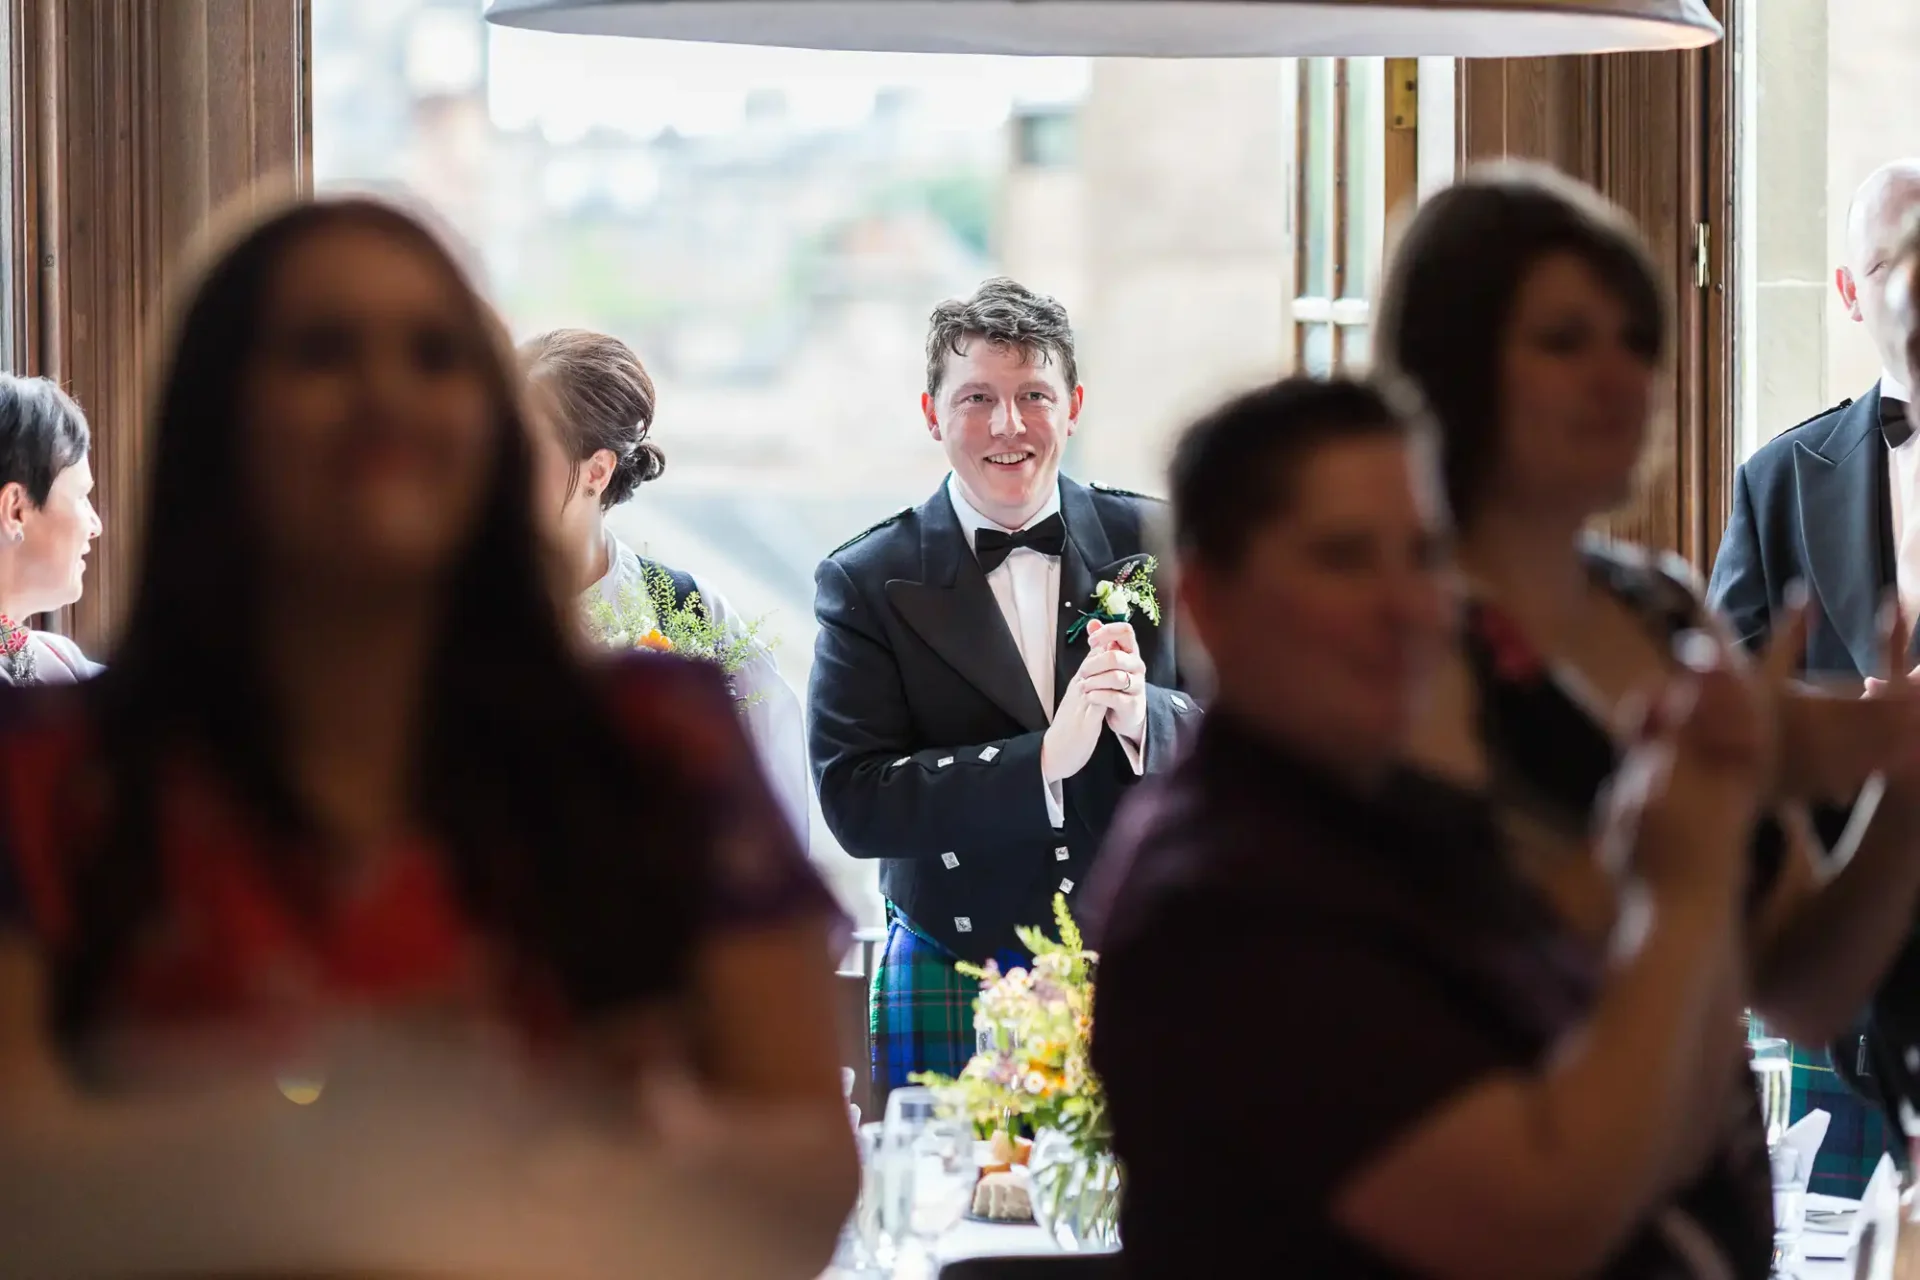 Man in a kilt smiling at a wedding reception, standing between blurred foreground figures and a bright window.